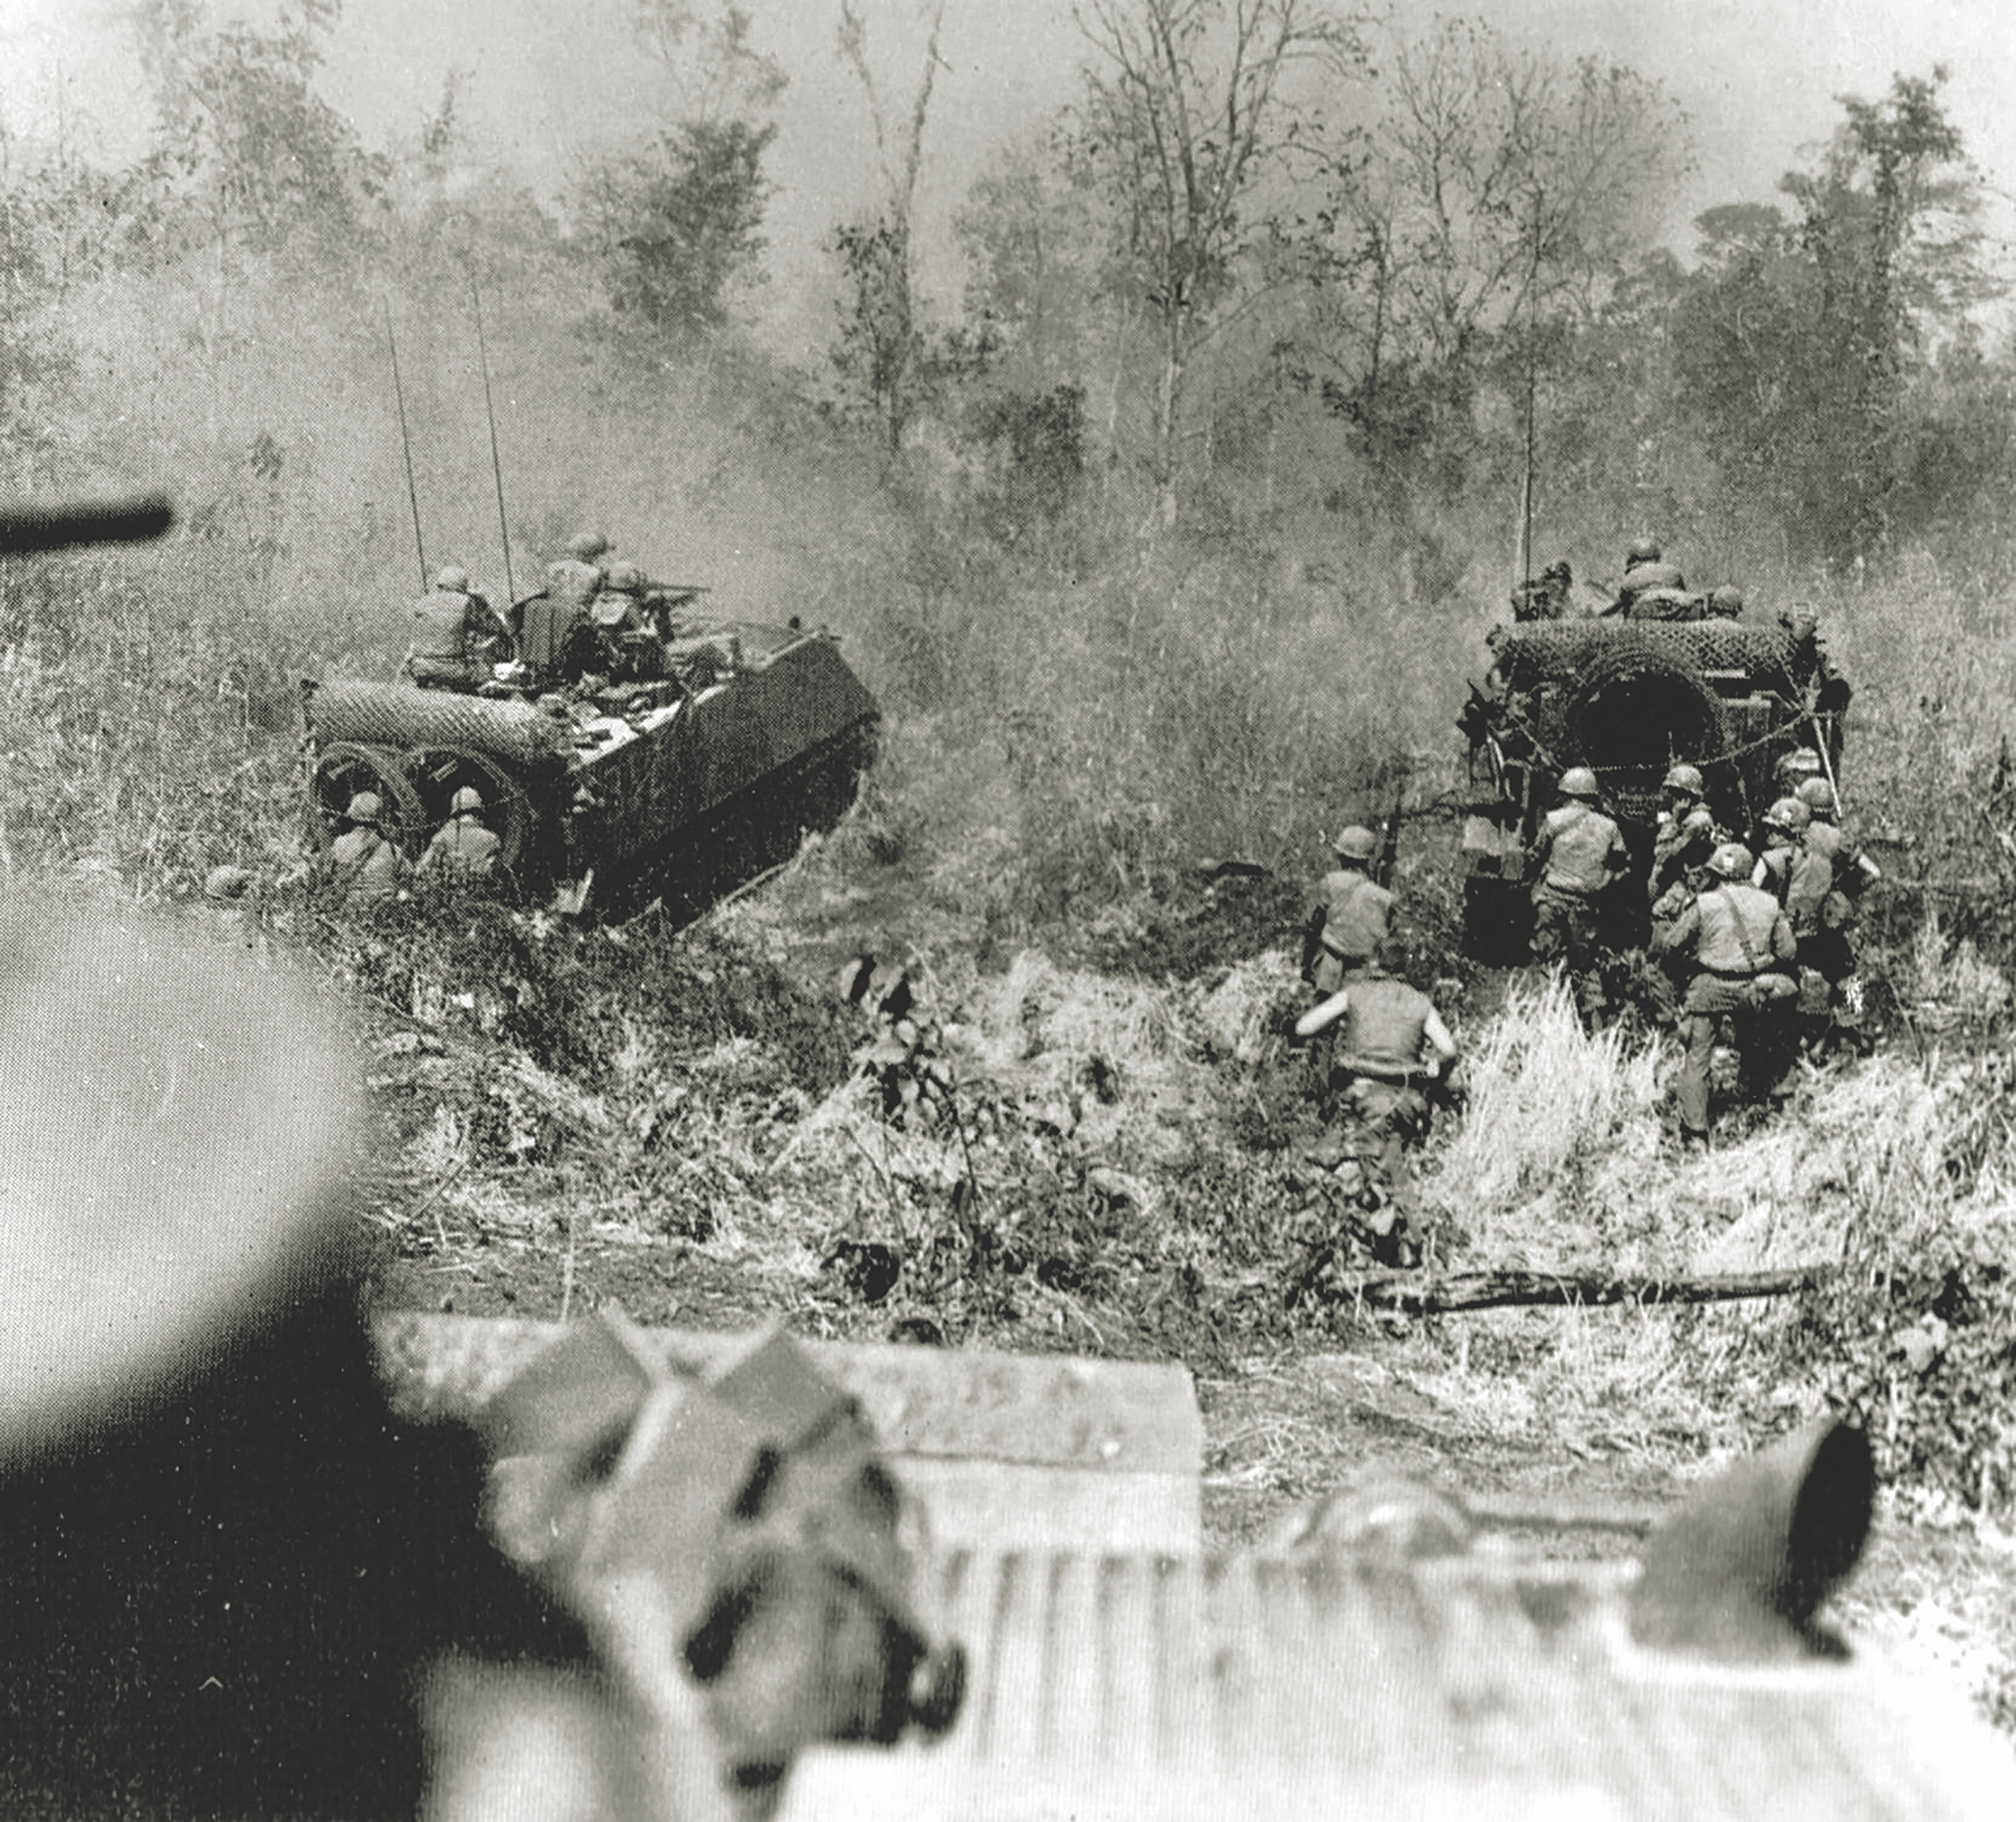 M113 Infantry teams advance into the bush. The personnel carriers often lined up side by side as they went into battle. (PJF Military Collection/Alamy)